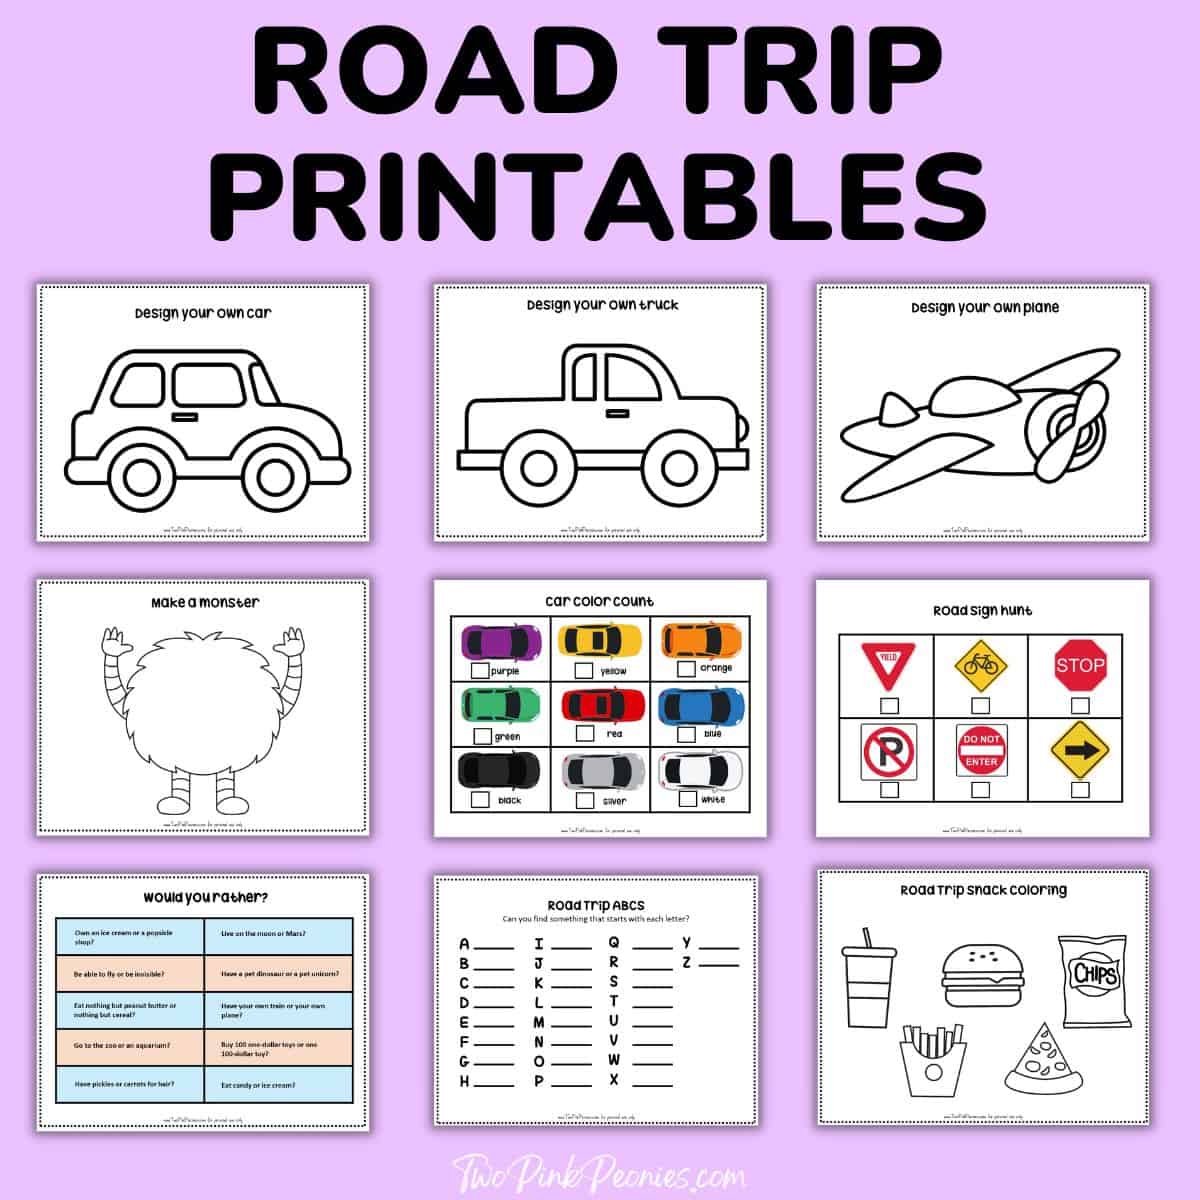 Text that says road trip printables with mock ups of printables for a road trip for preschoolers under it.